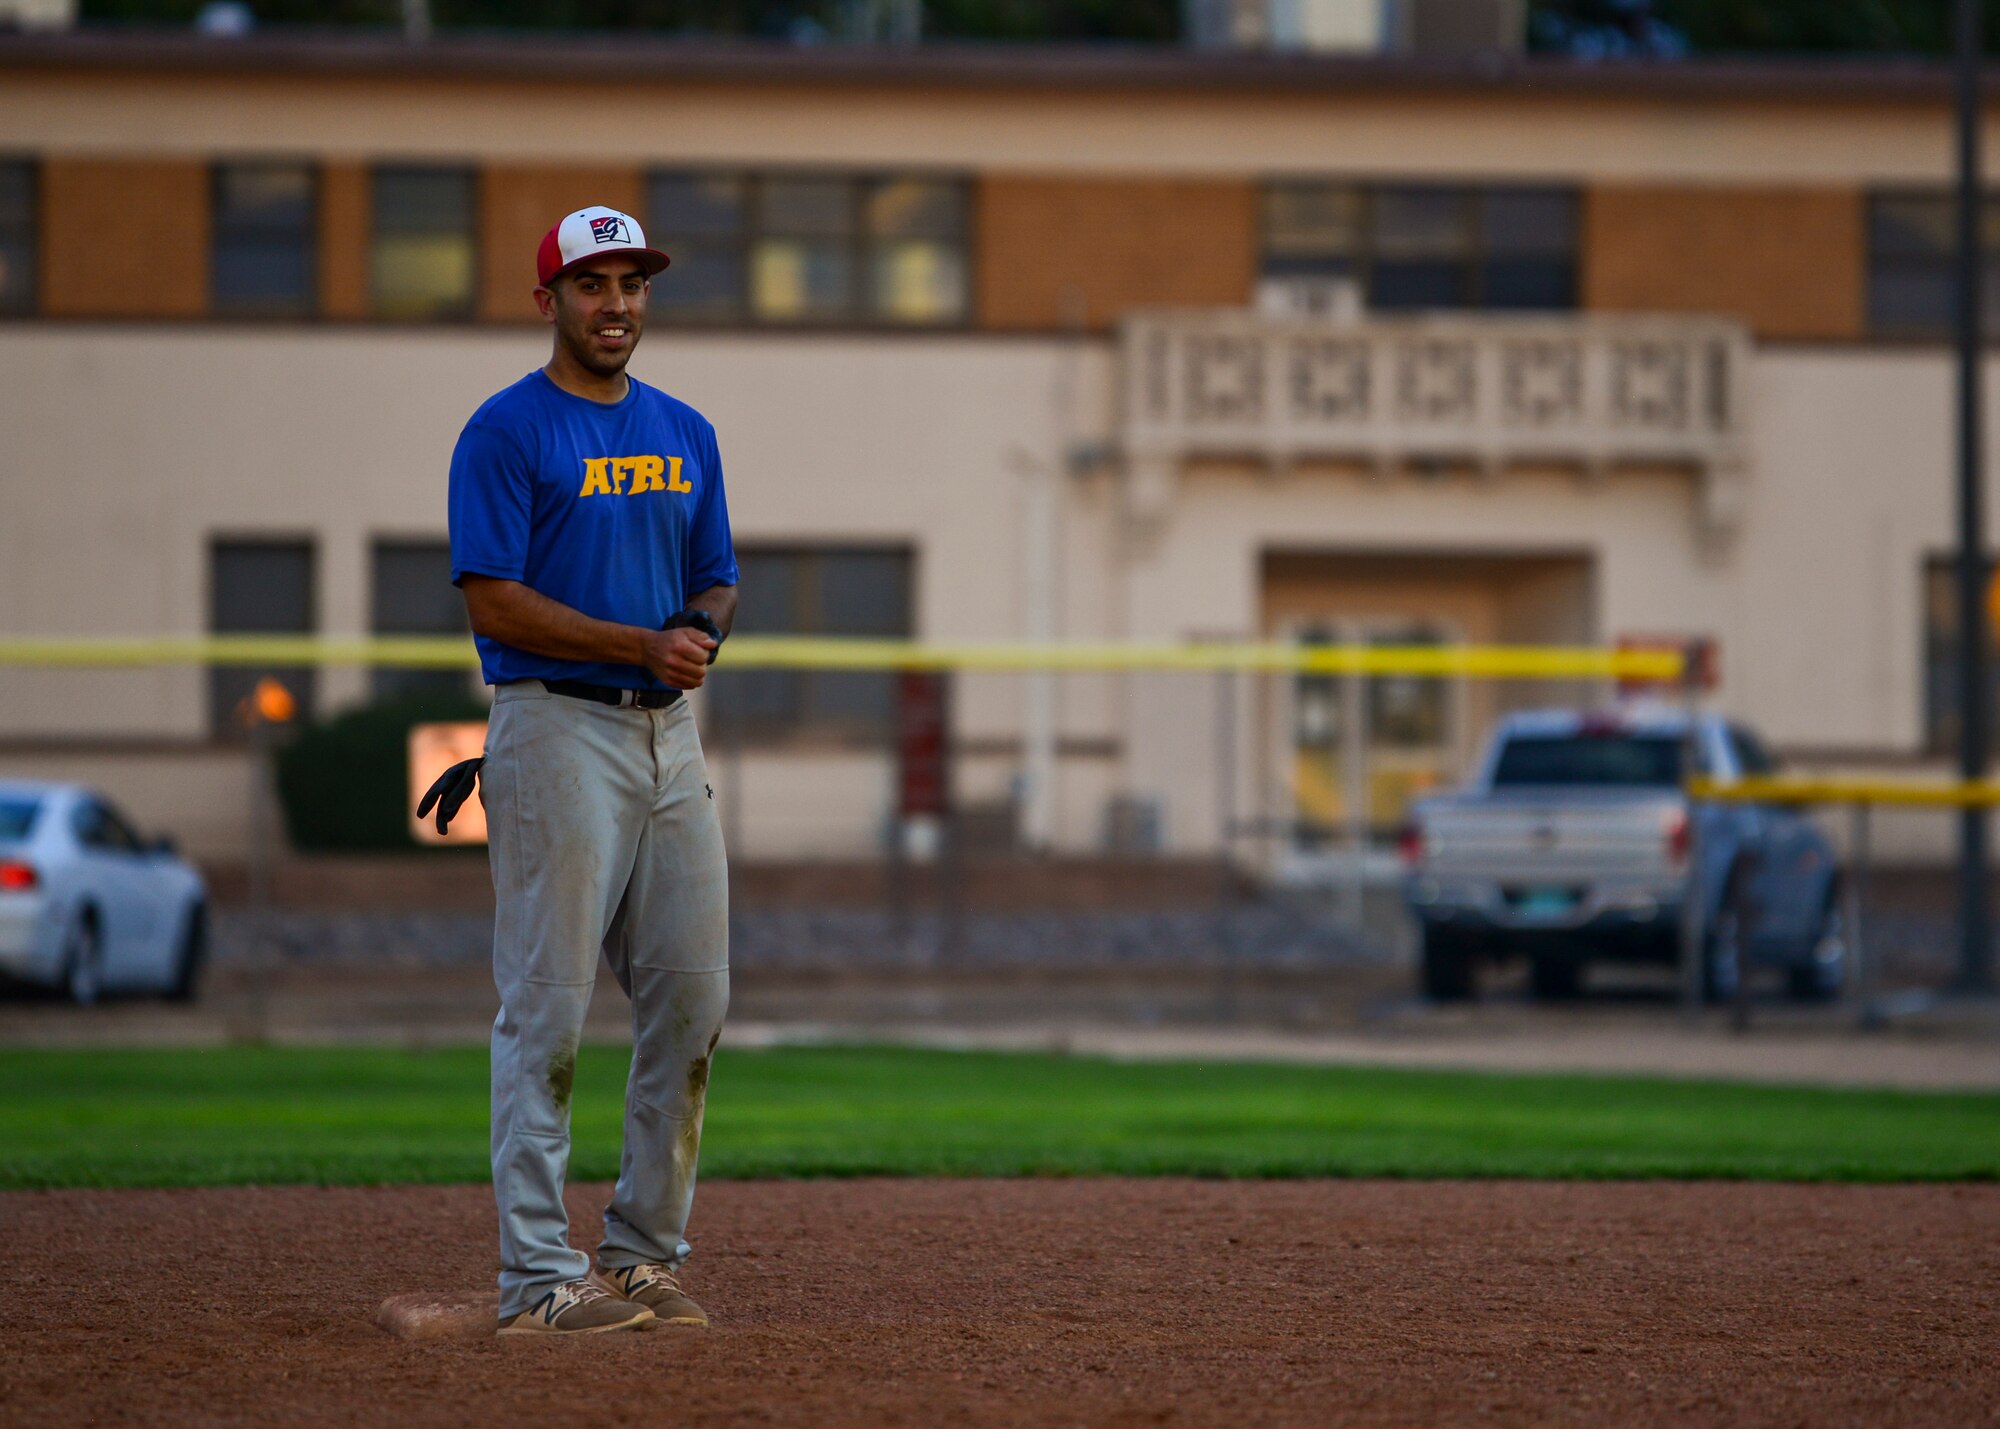 Marcus Mansfield, outfielder for Team AFRL, stands at second base during the 2019 Kirtland Softball Intramural Championship Game at Kirtland Air Force Base, N.M., August 22, 2019. The championship game was a seven-inning game with Team AFRL beating Team SFS with a final score of 26-22. (U.S. Air Force photo by Airman 1st Class Austin J. Prisbrey)